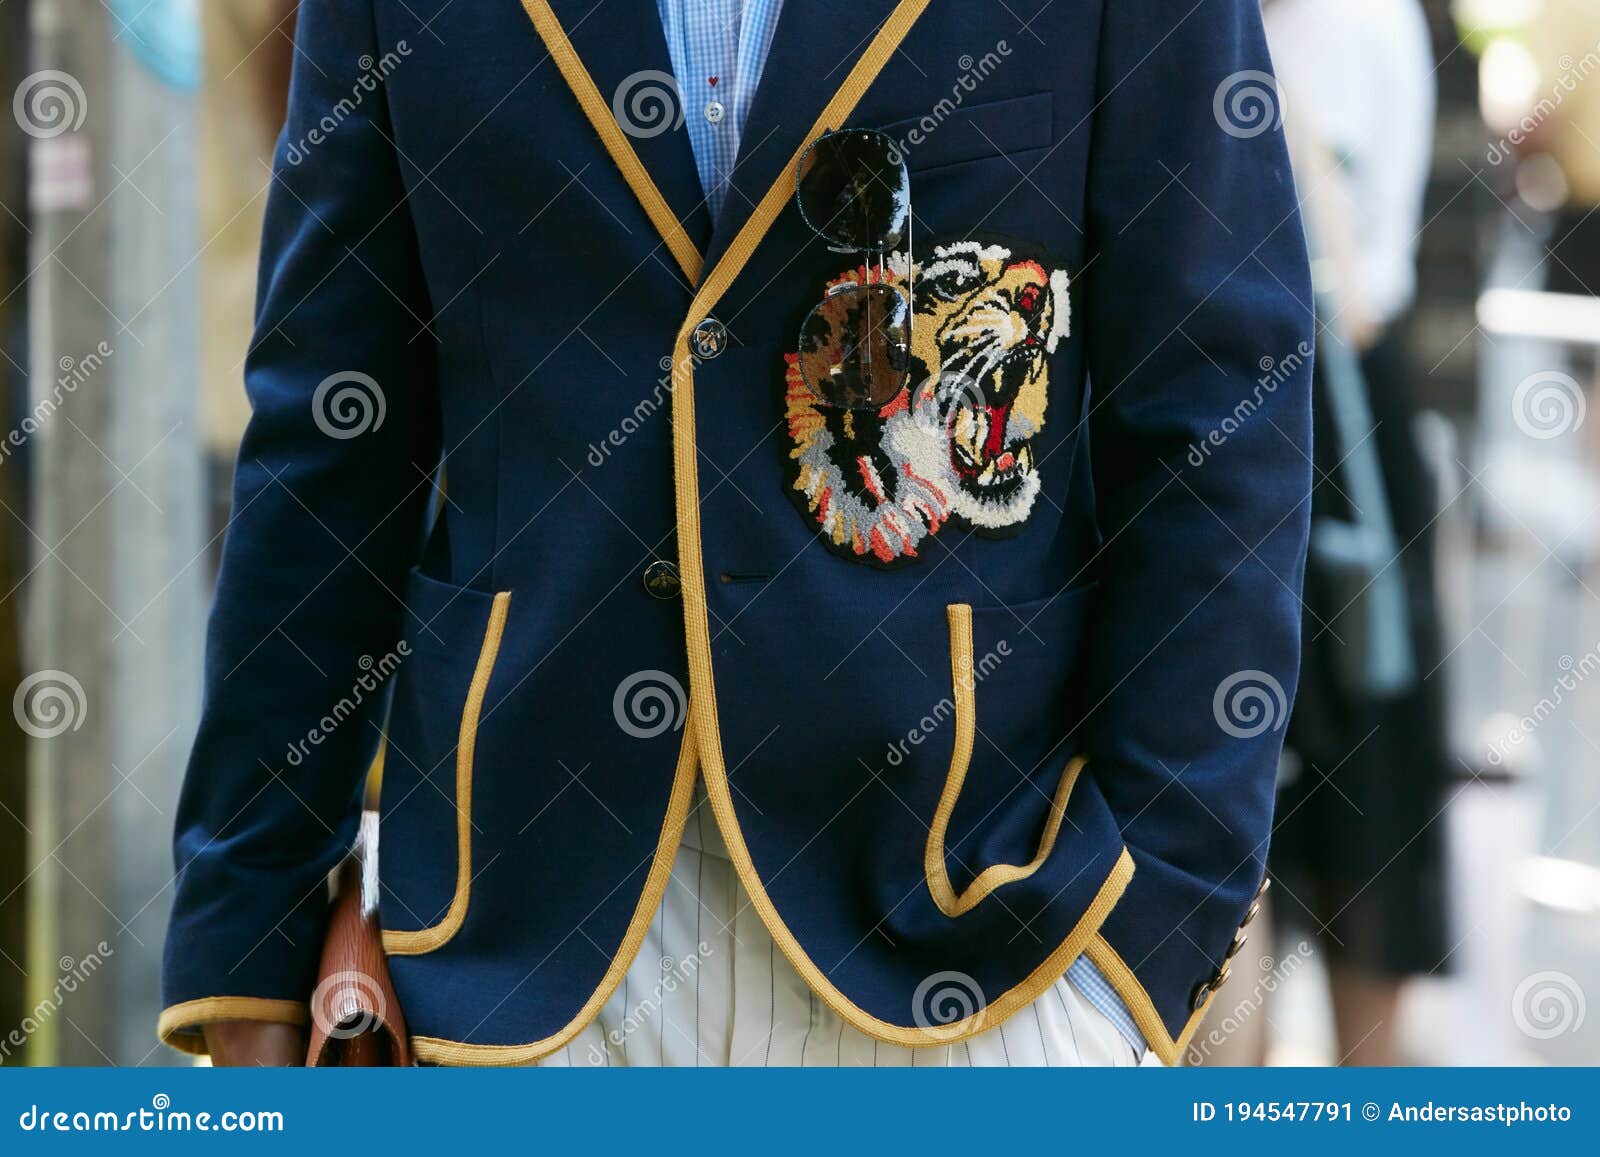 Man with Blue Gucci Jacket with Tiger Head and Yellow Details Design before  Giorgio Armani Fashion Show, Milan Editorial Photo - Image of style, look:  194547791